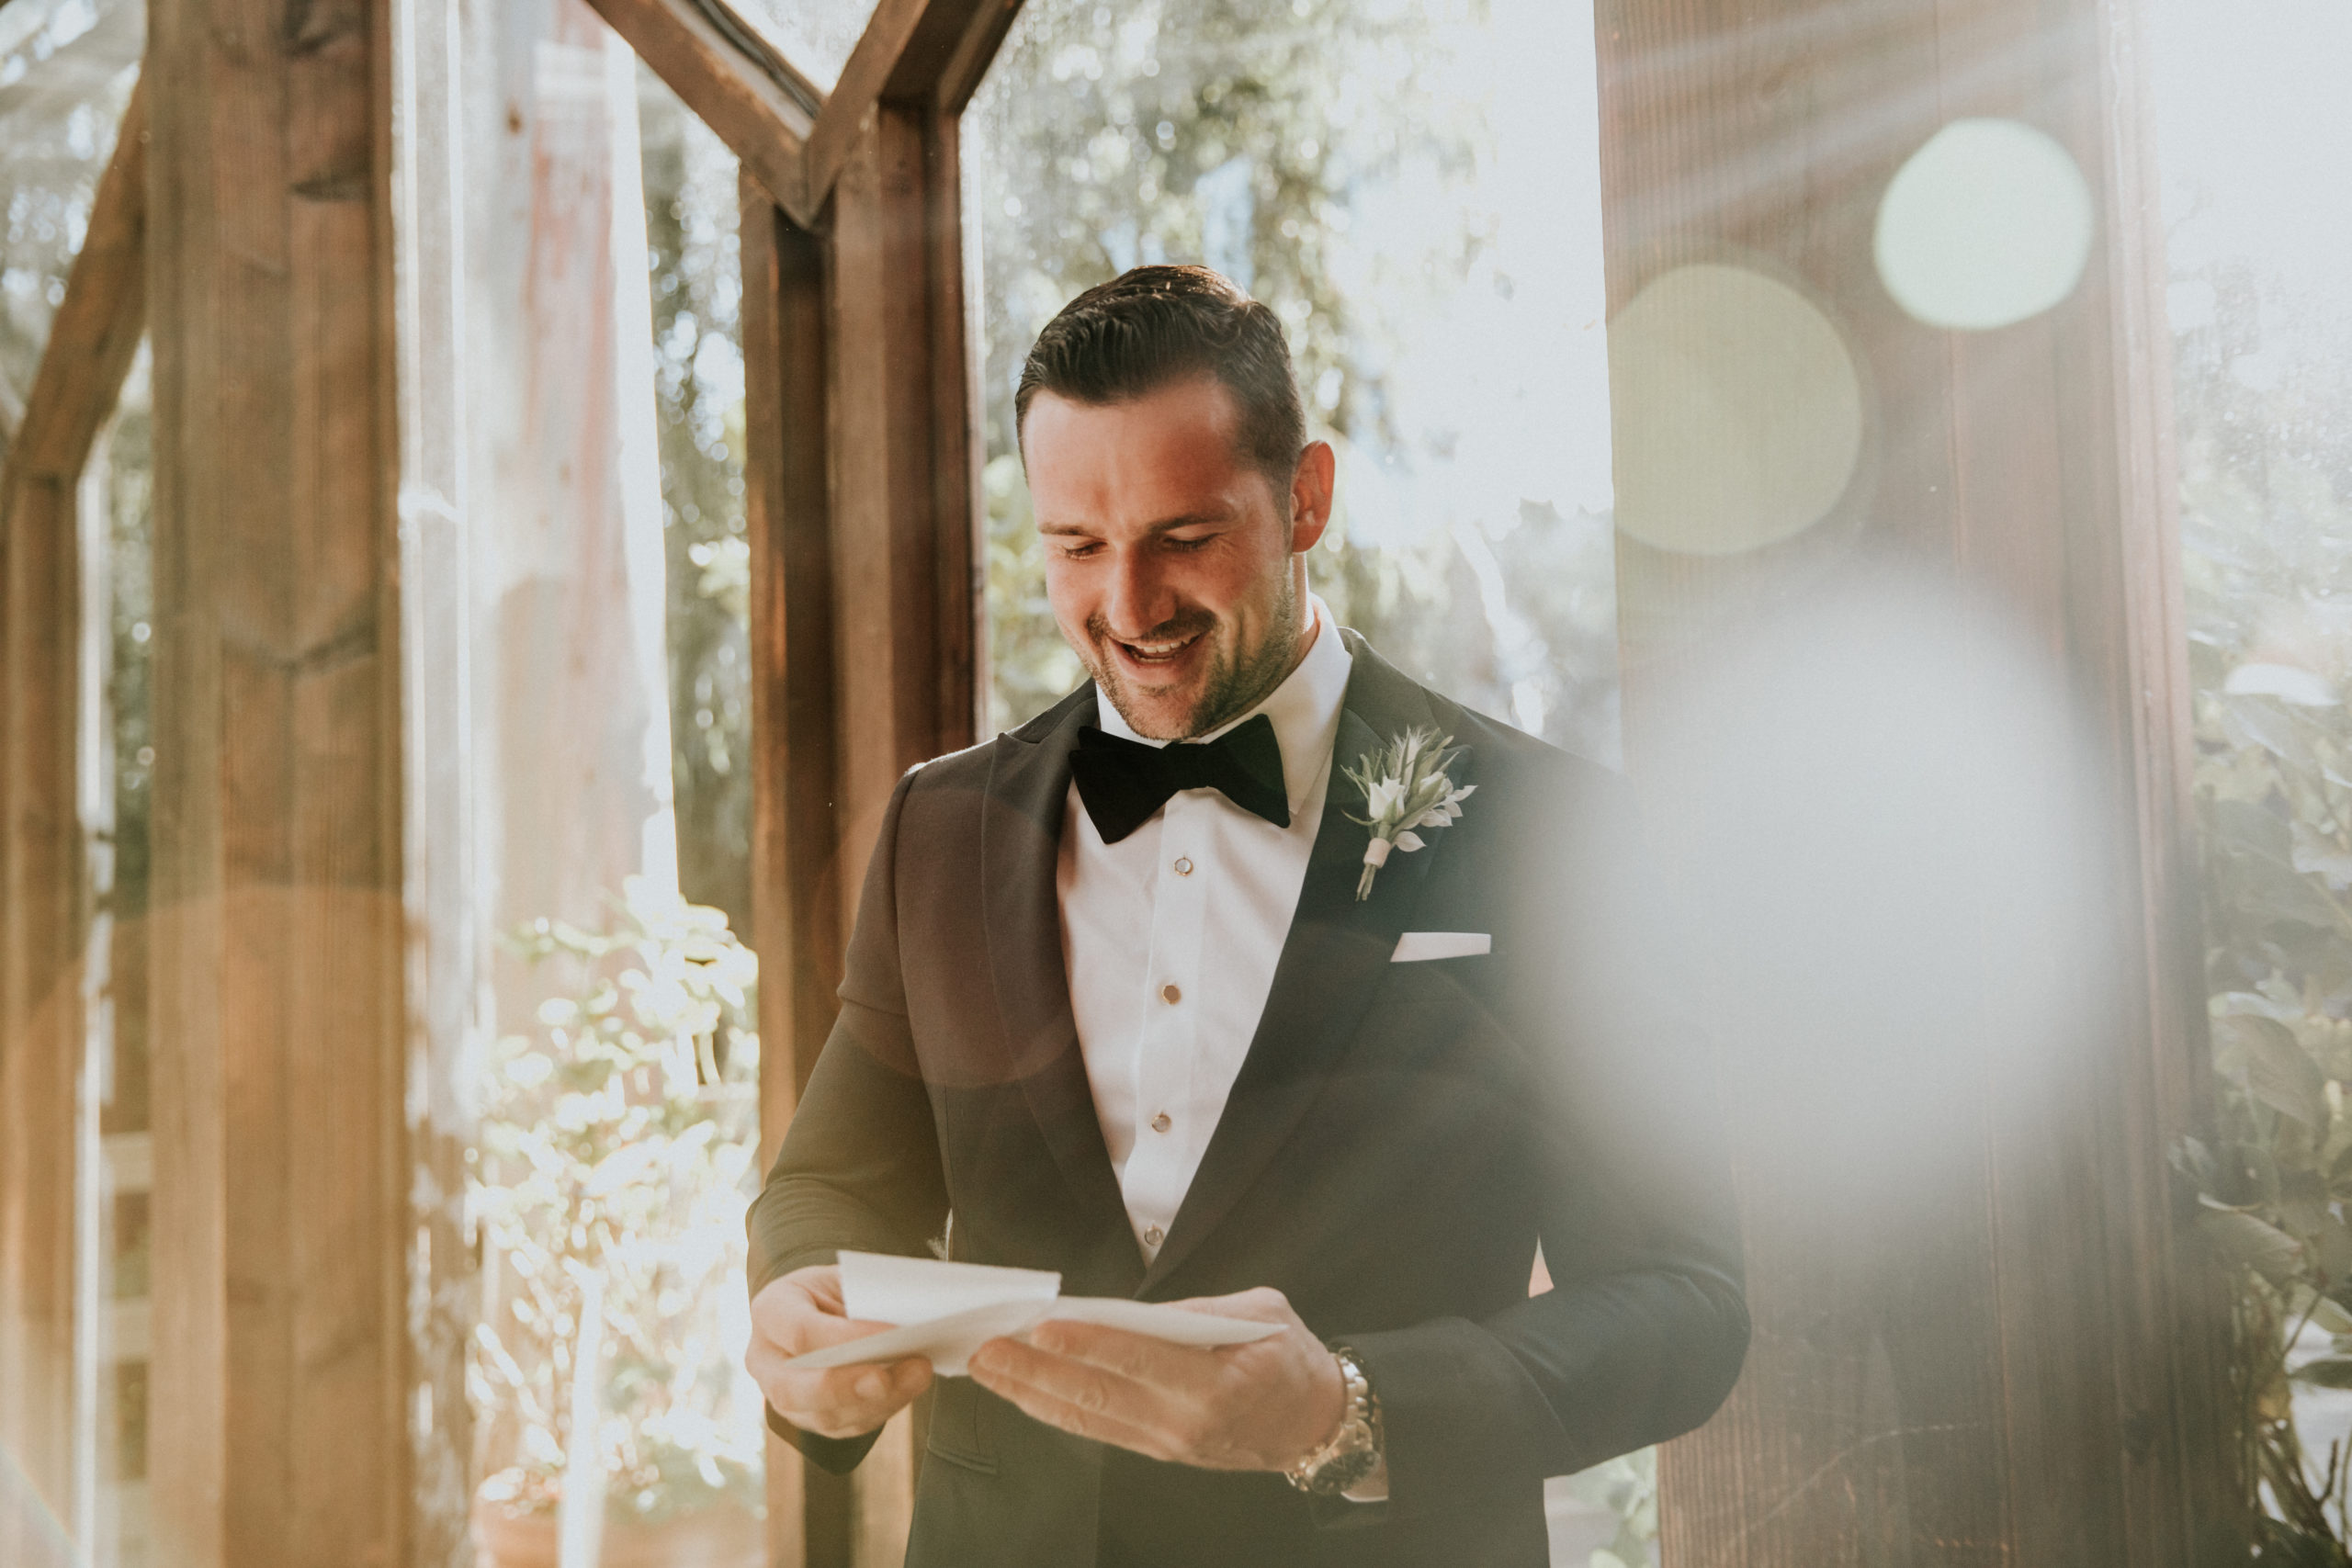 Groom getting ready on wedding day with light beaming through the window reading a letter from his bride smiling